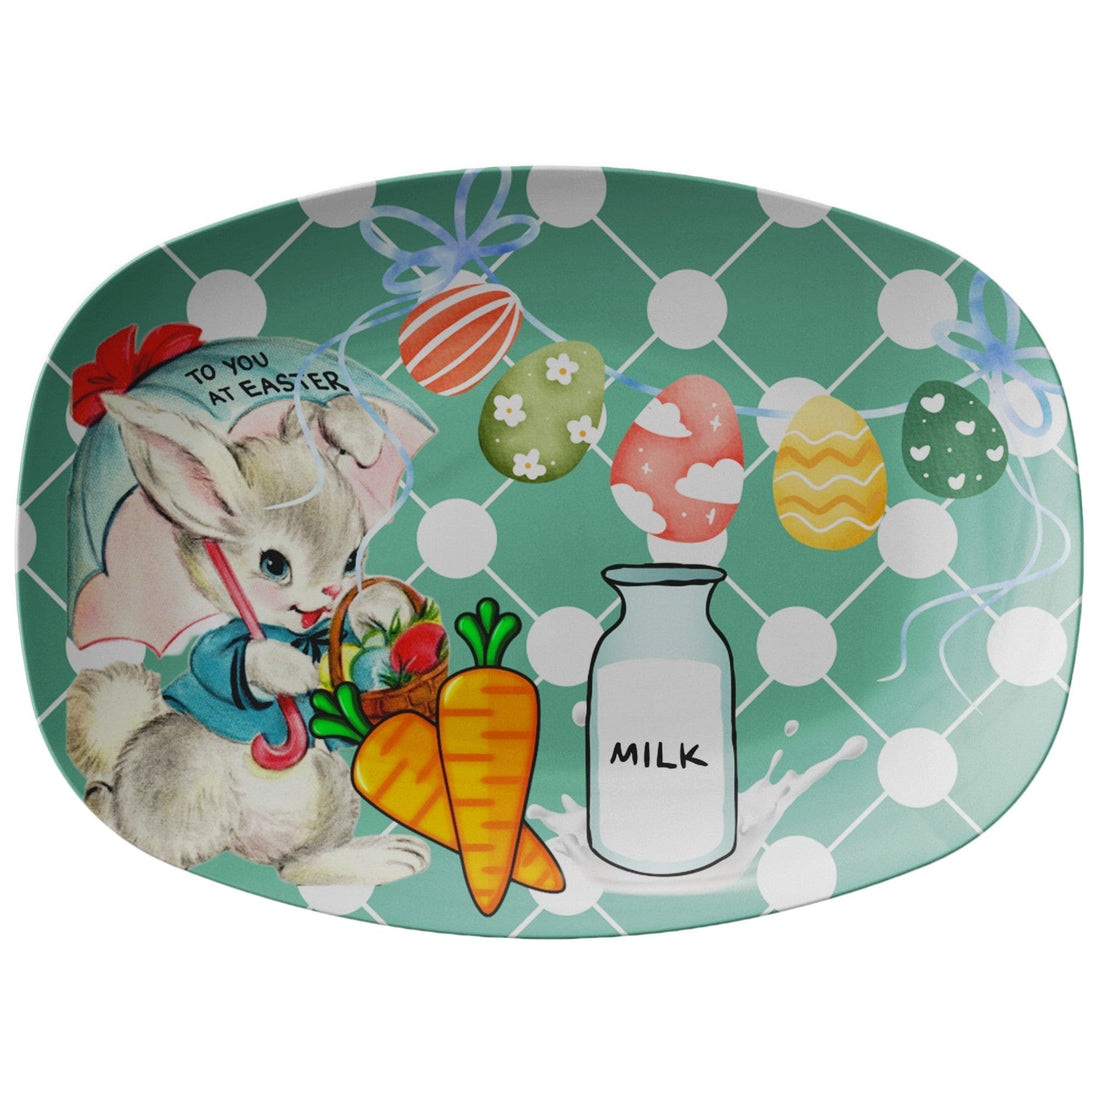 Vintage Easter Card, Easter Bunny Snack Platter, Treat Plate, Easter Sunday Special Gift Kitchenware